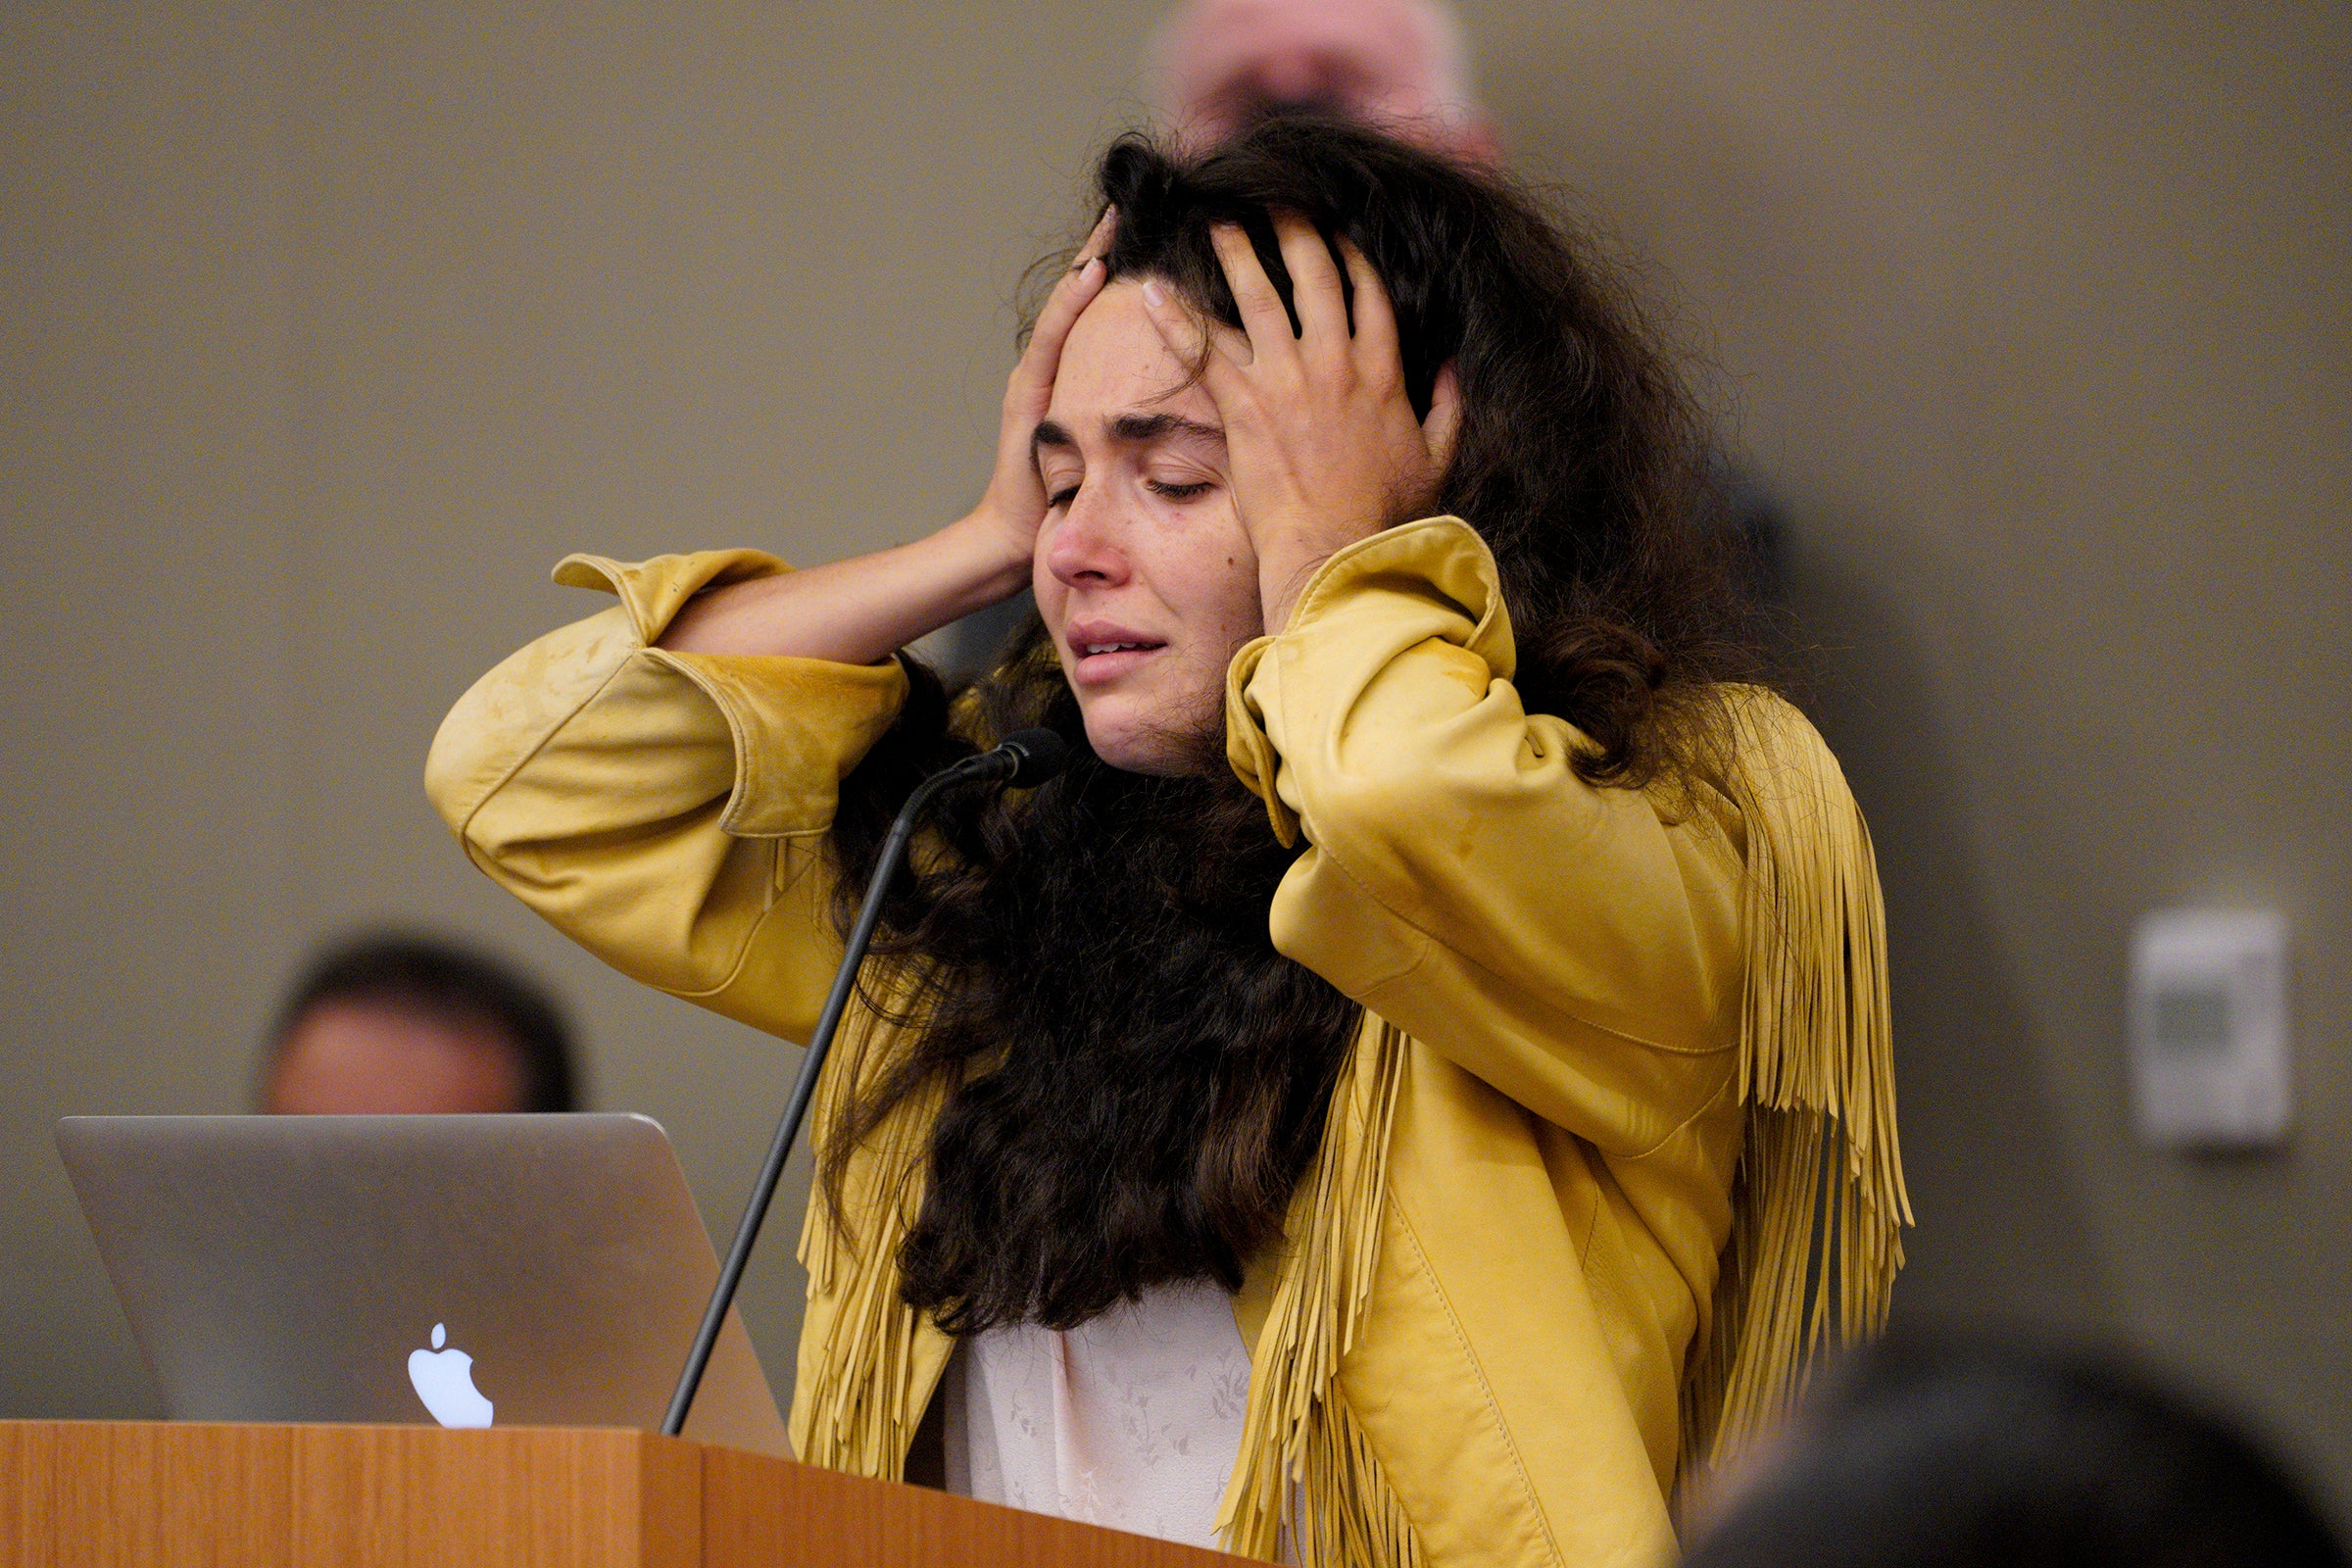 Hannah Kaye paused to recompose herself before giving a victim impact statement during John T Earnest's sentencing hearing in Superior Court, Thursday, 30 September 2021 in San Diego